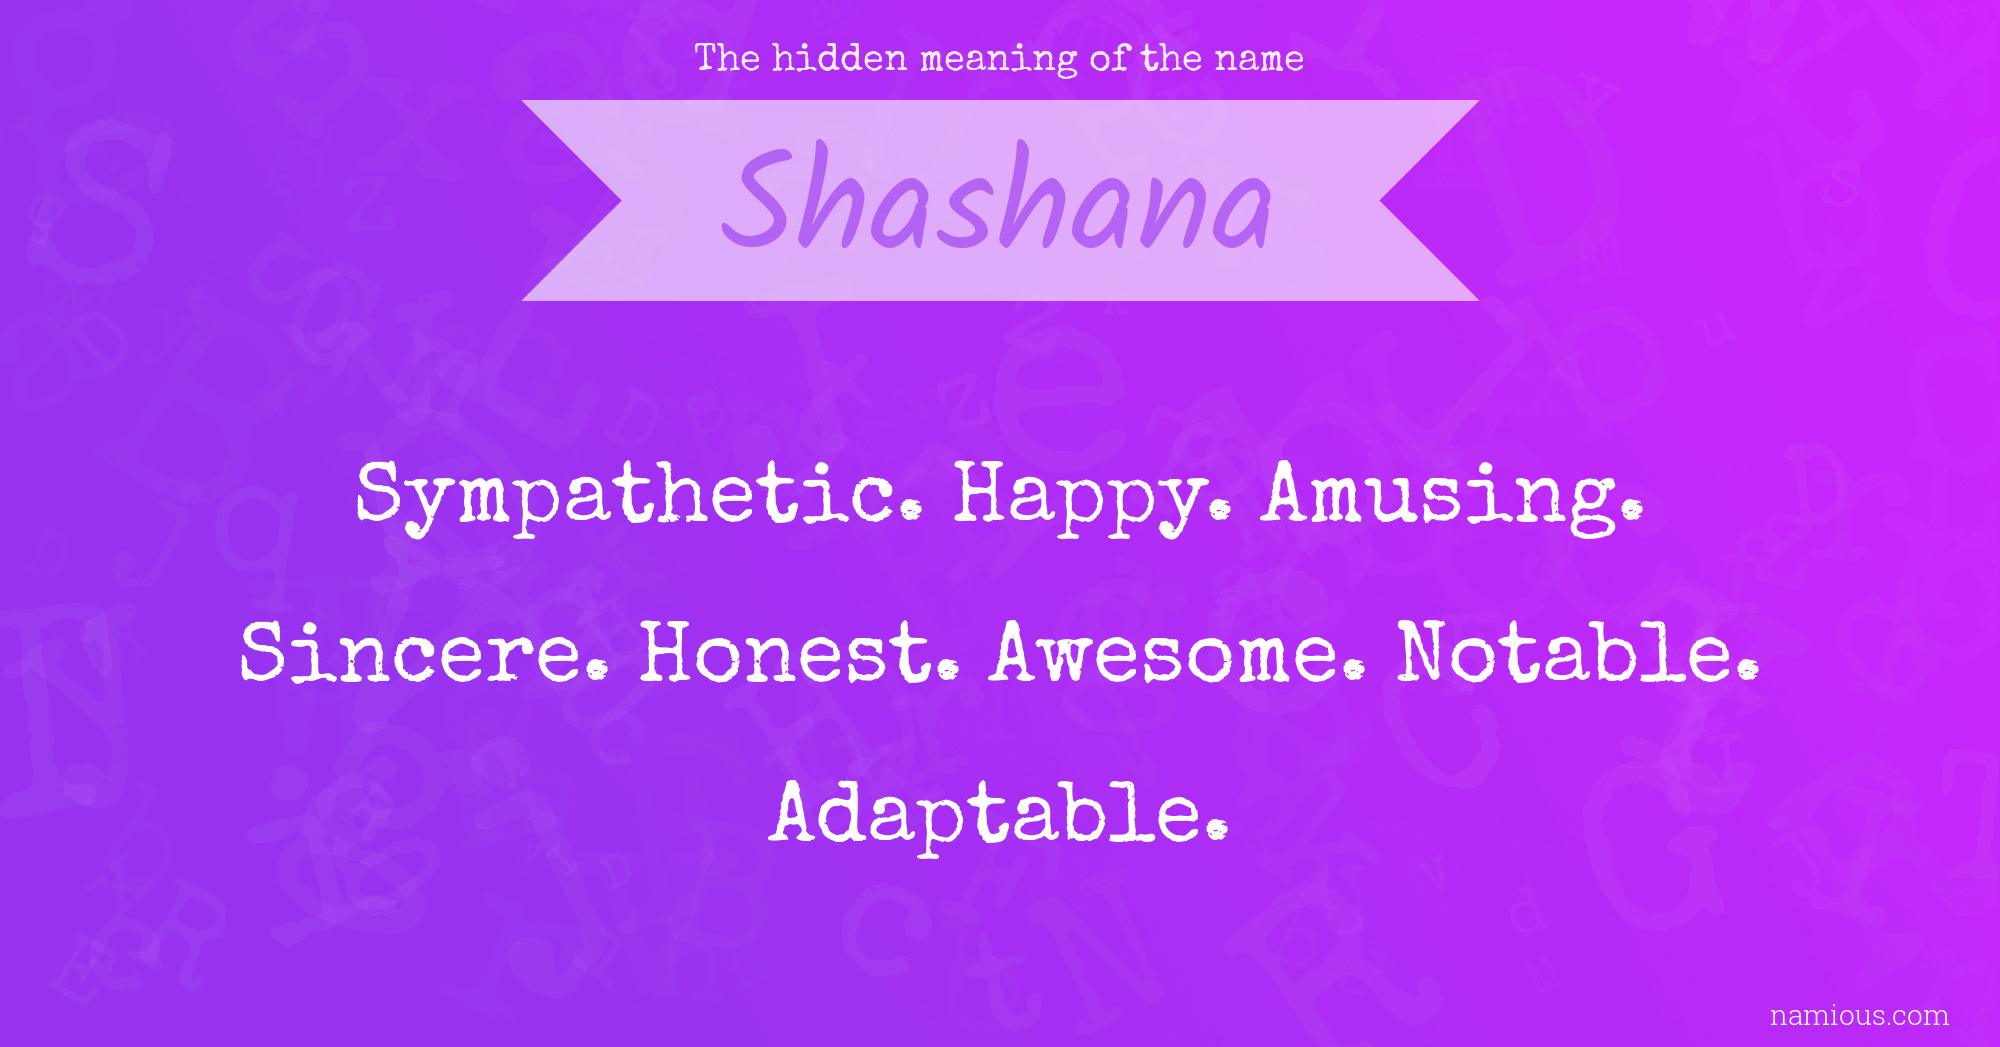 The hidden meaning of the name Shashana